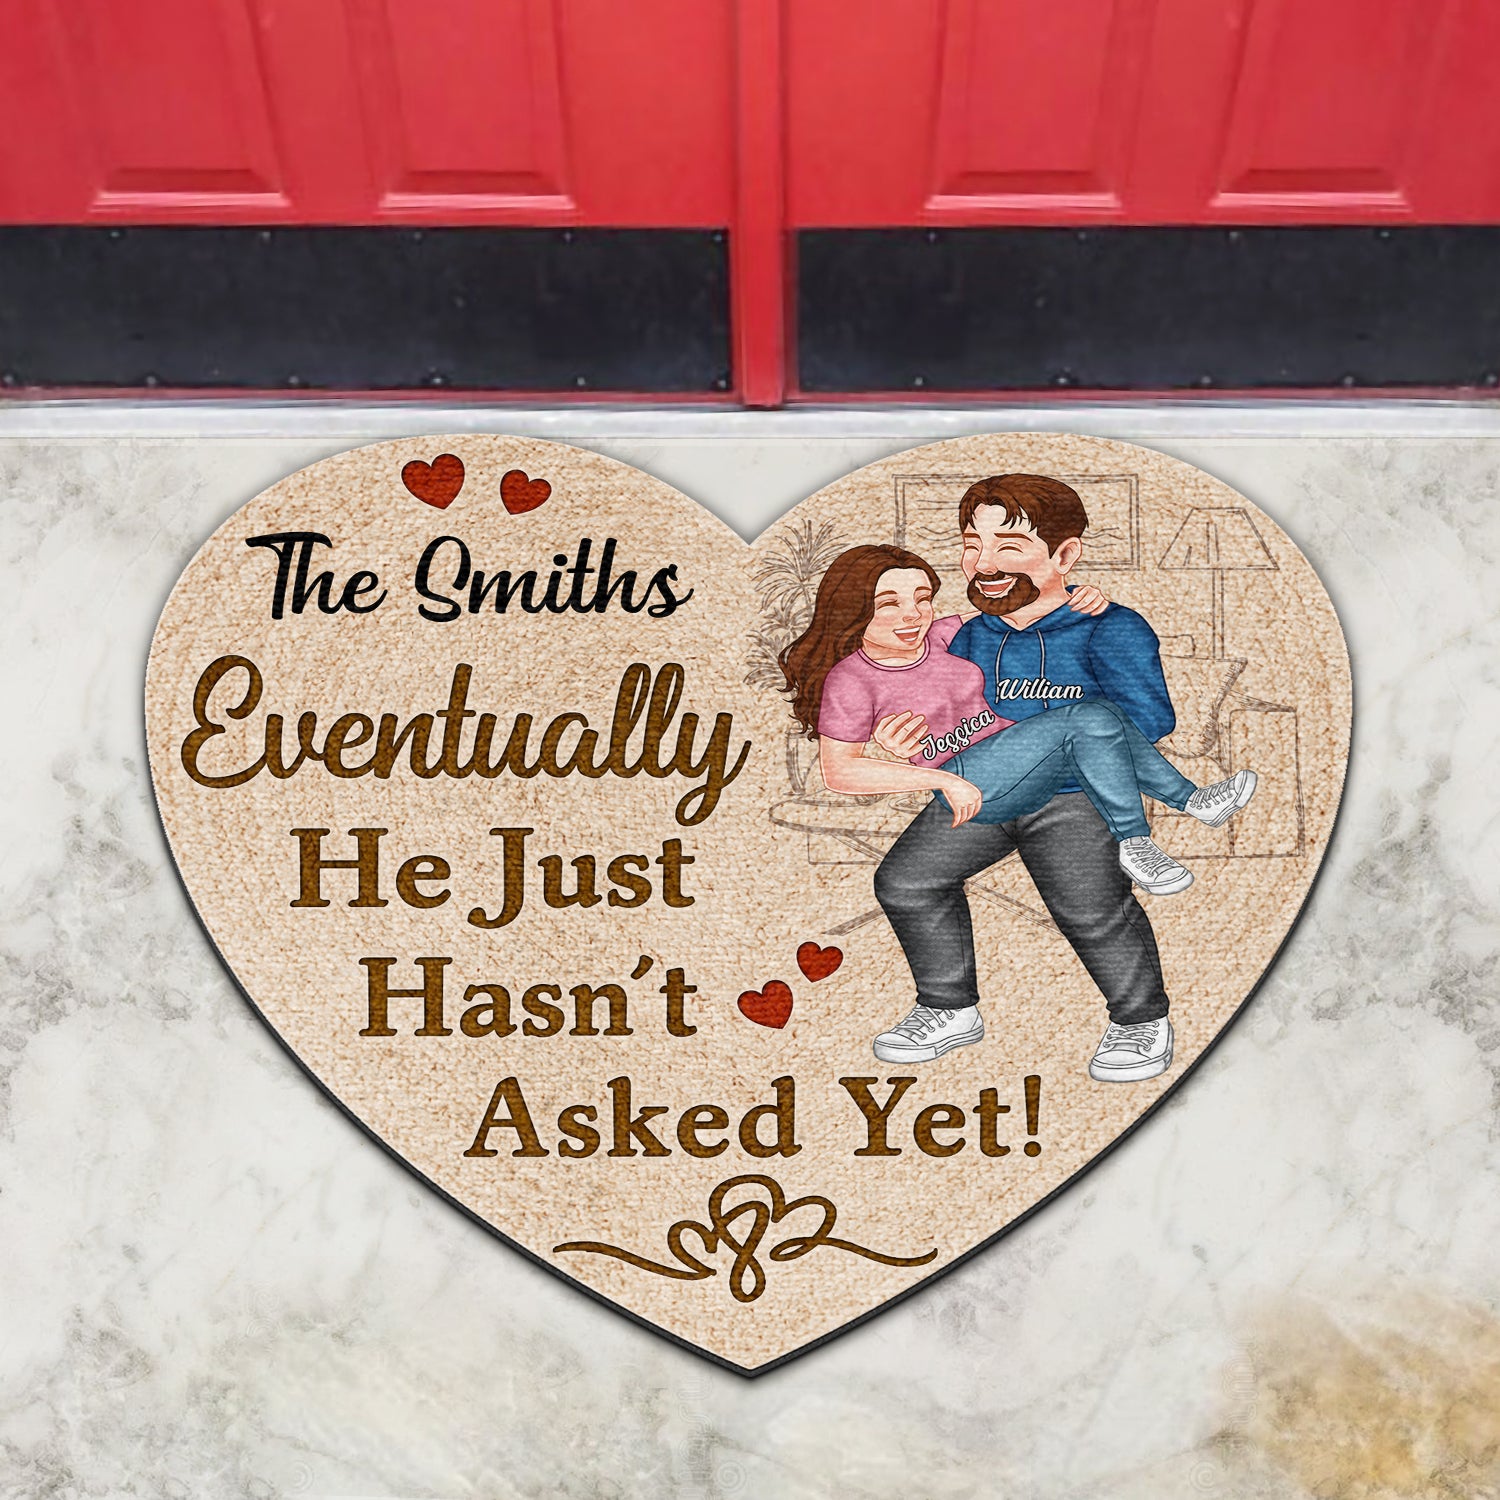 Eventually He Just Hasn't Asked Yet - Home Decor For Couples - Personalized Custom Shaped Doormat